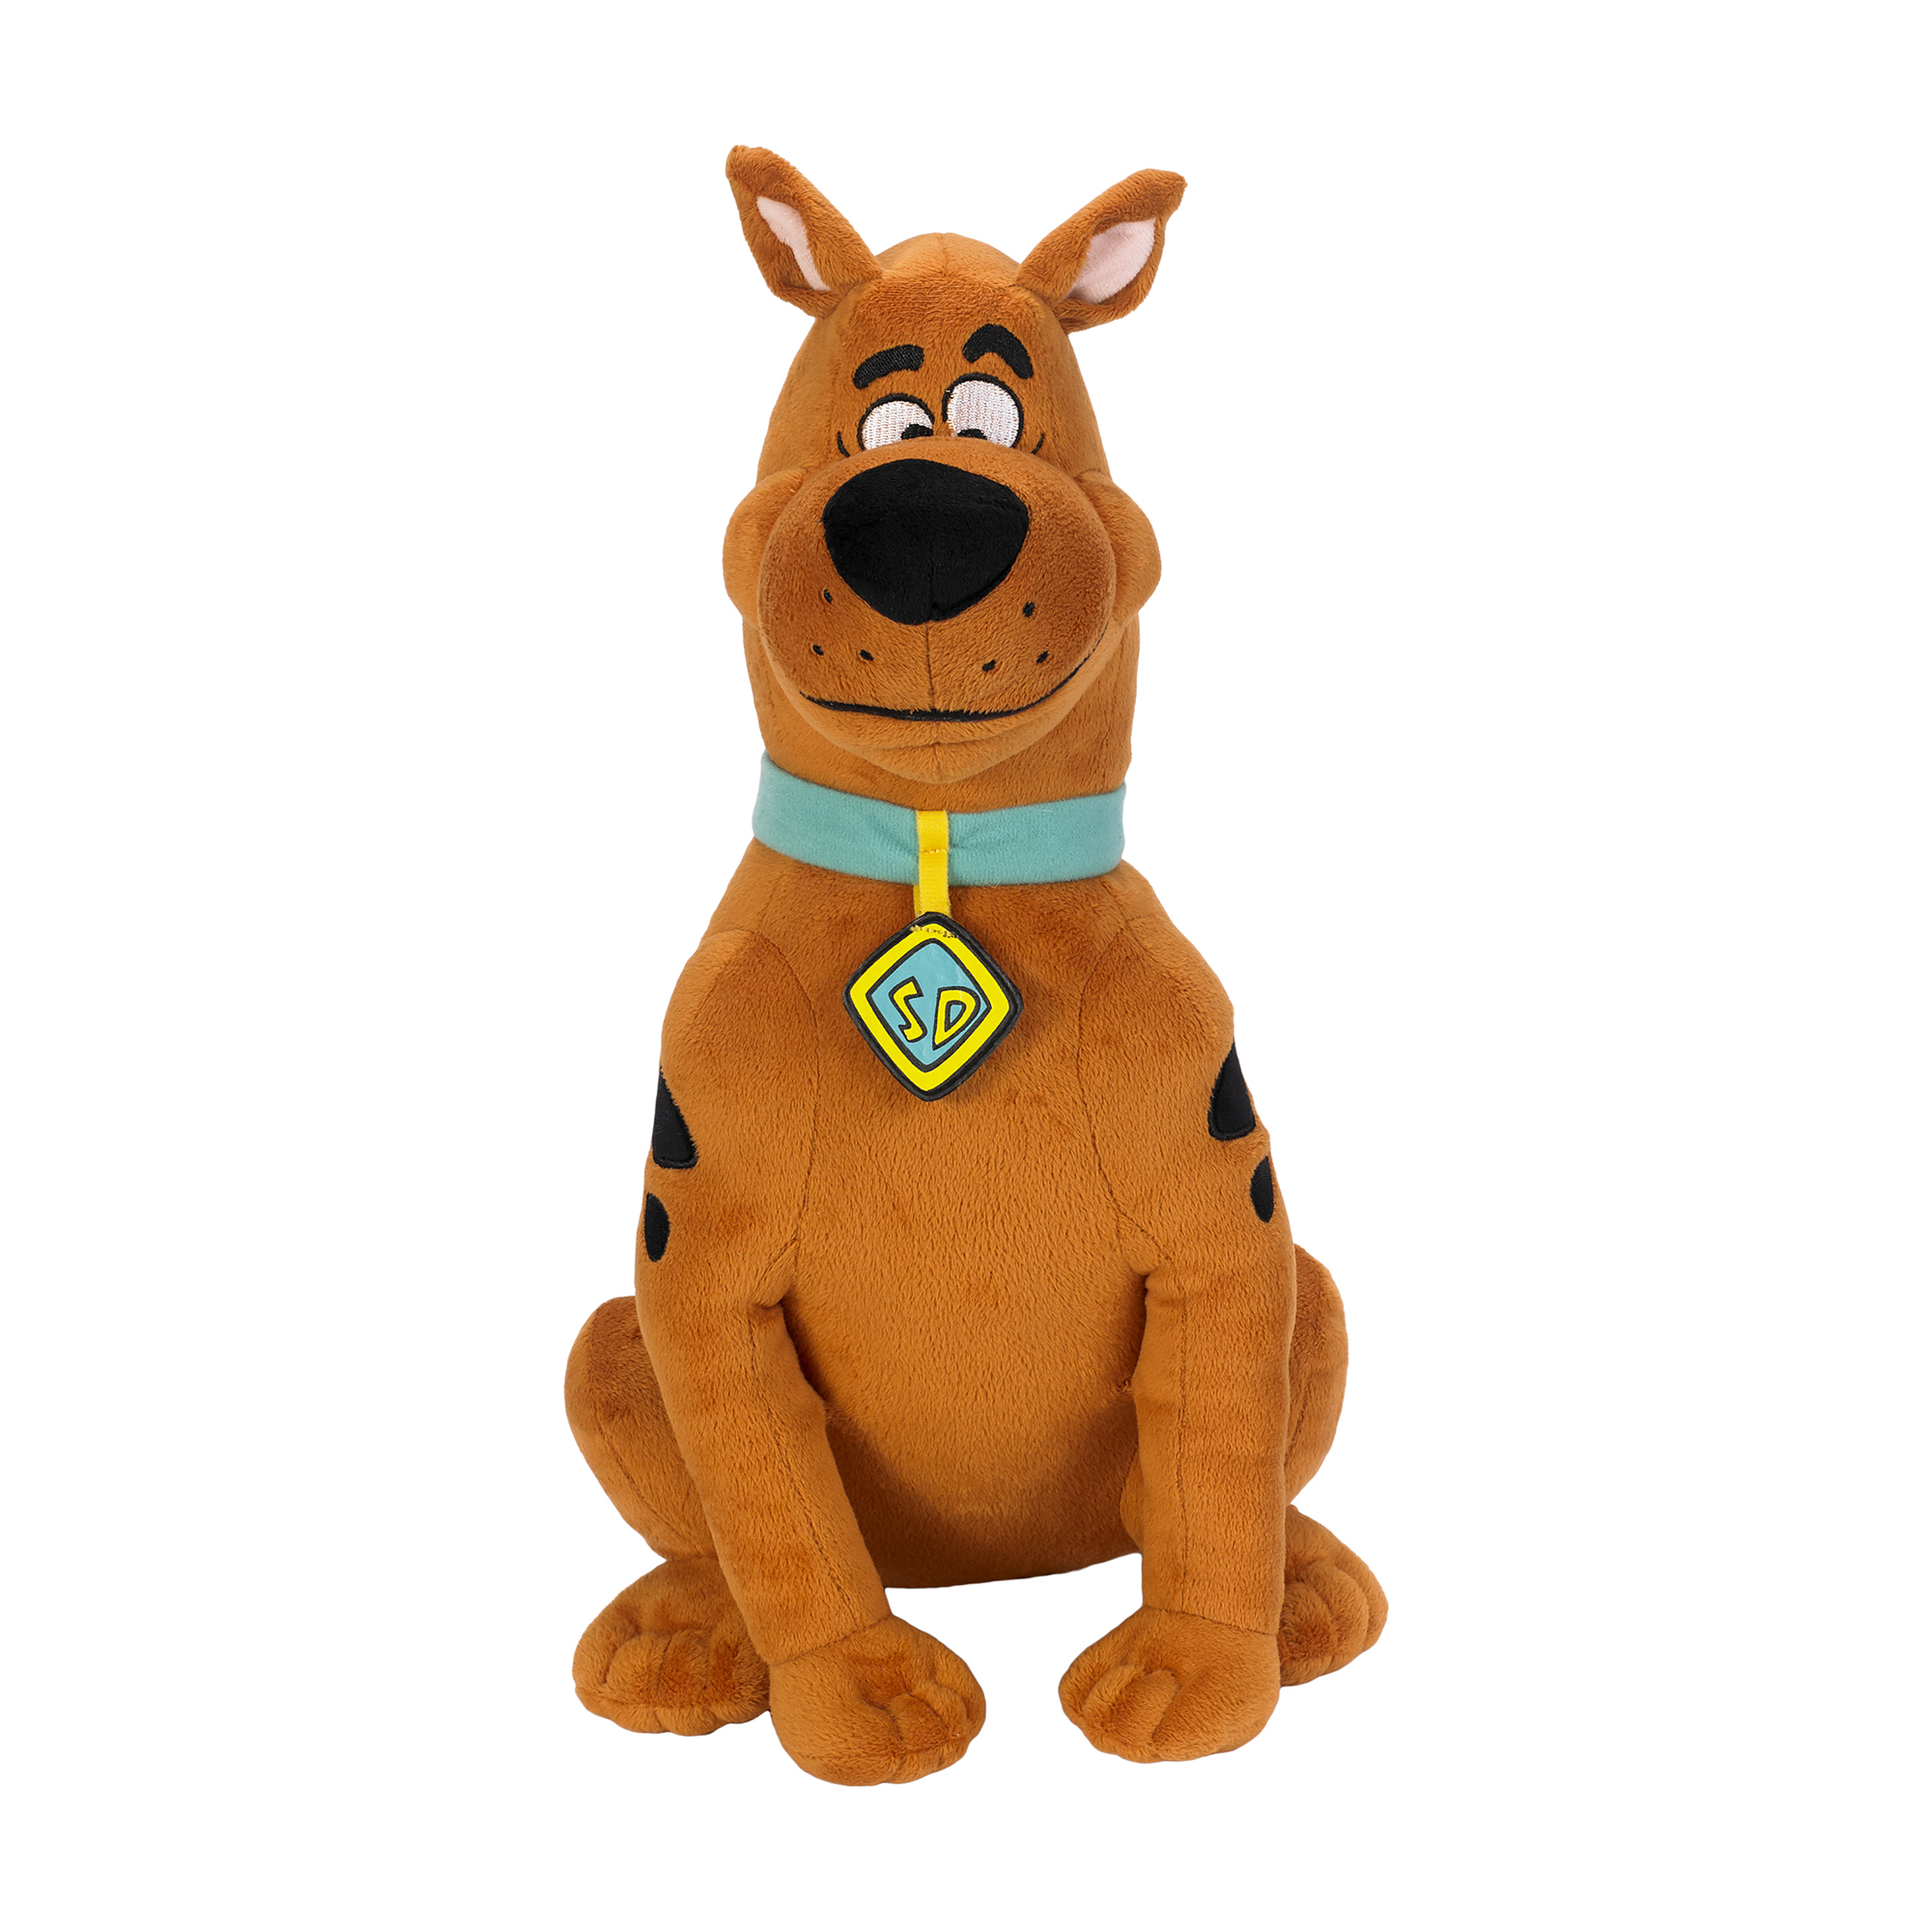 SCOOB! Scooby-Doo Kids Bedding Super Soft Plush Snuggle Cuddle Pillow, Scooby - image 4 of 6